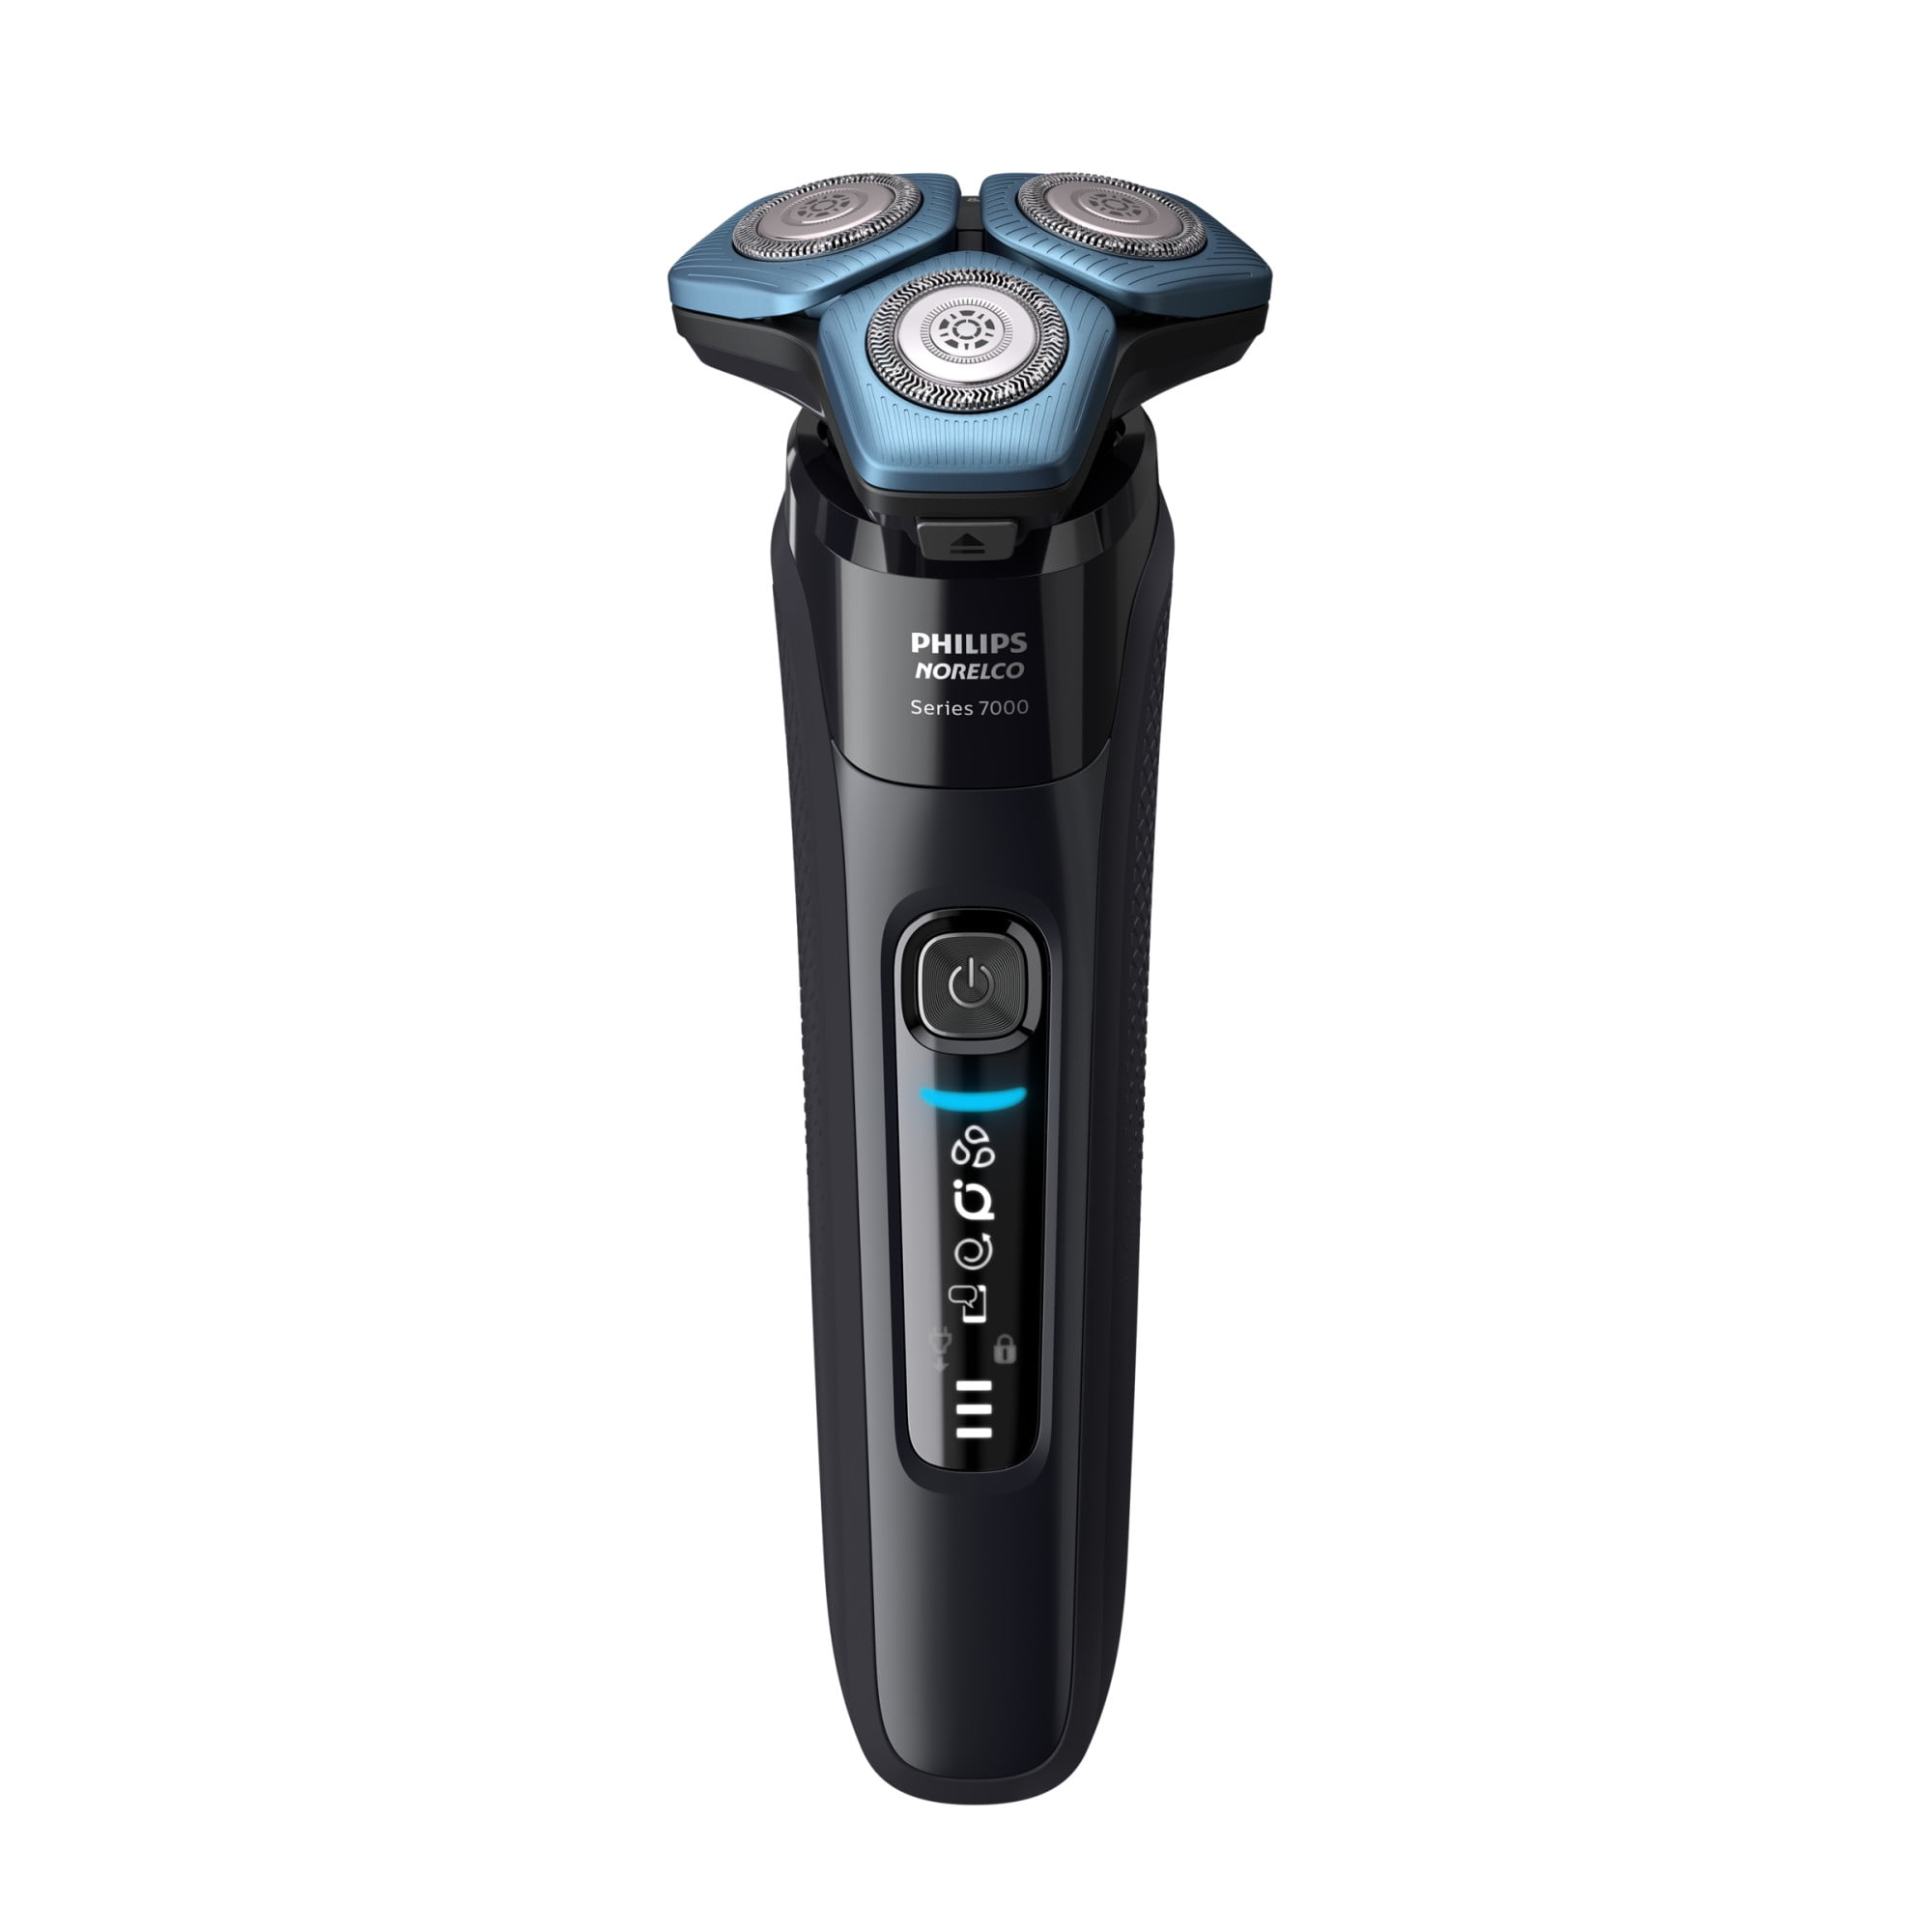 Philips Norelco Shaver Rechargeable Wet Dry Electric Shaver with Senseiq Technology, Quick Clean Pod, Travel Case and Pop-Up S7783/84 Walmart.com